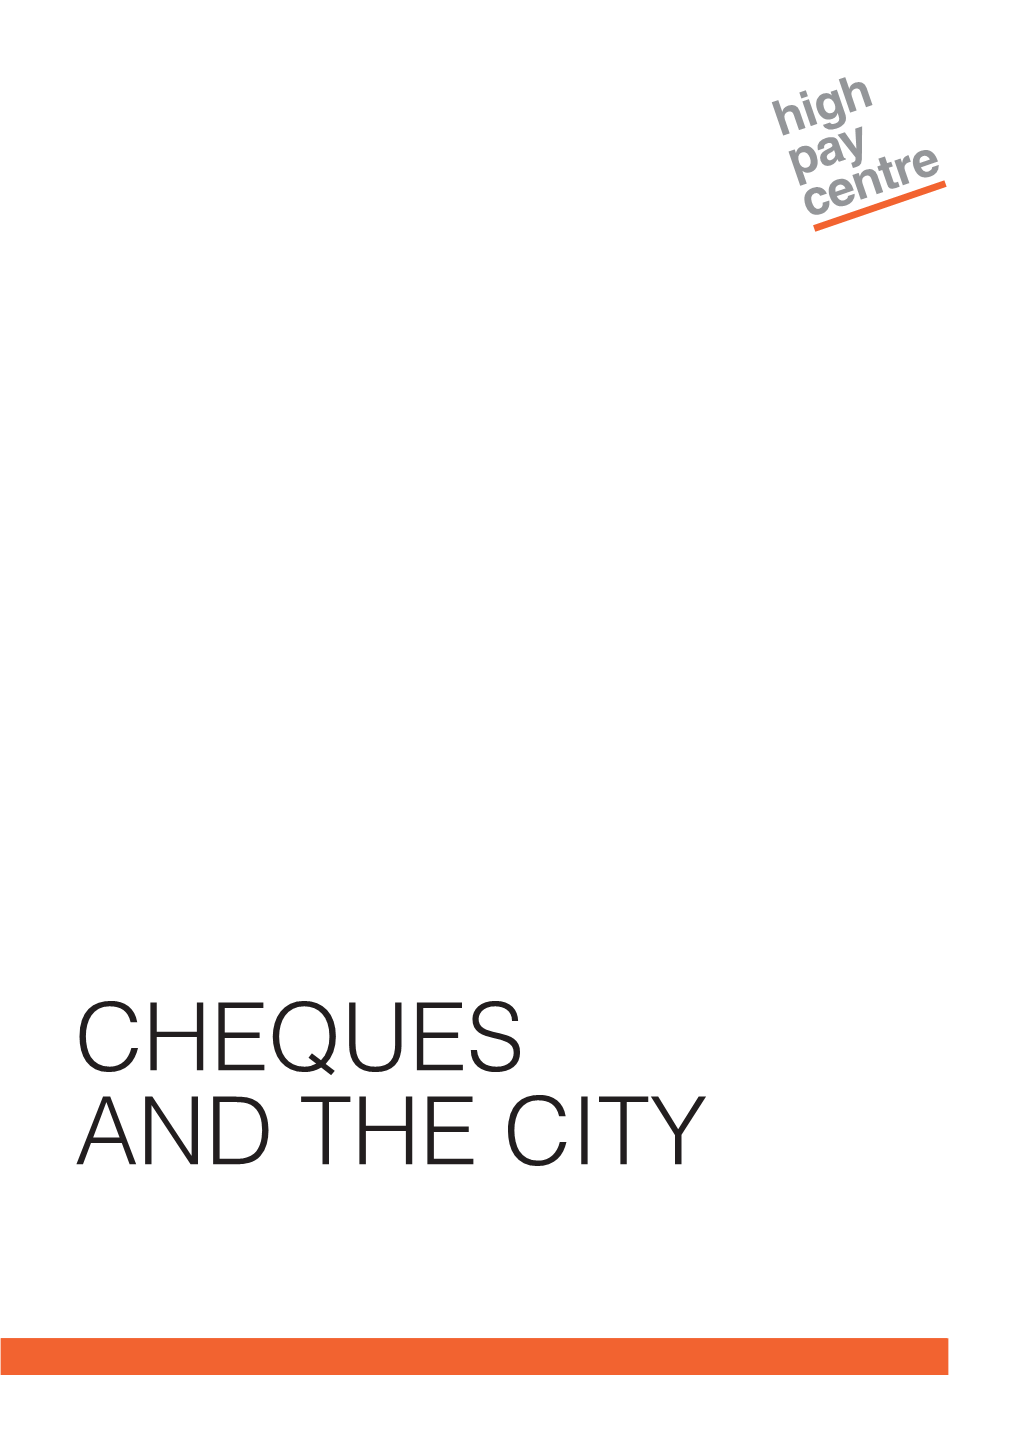 Cheques and the City